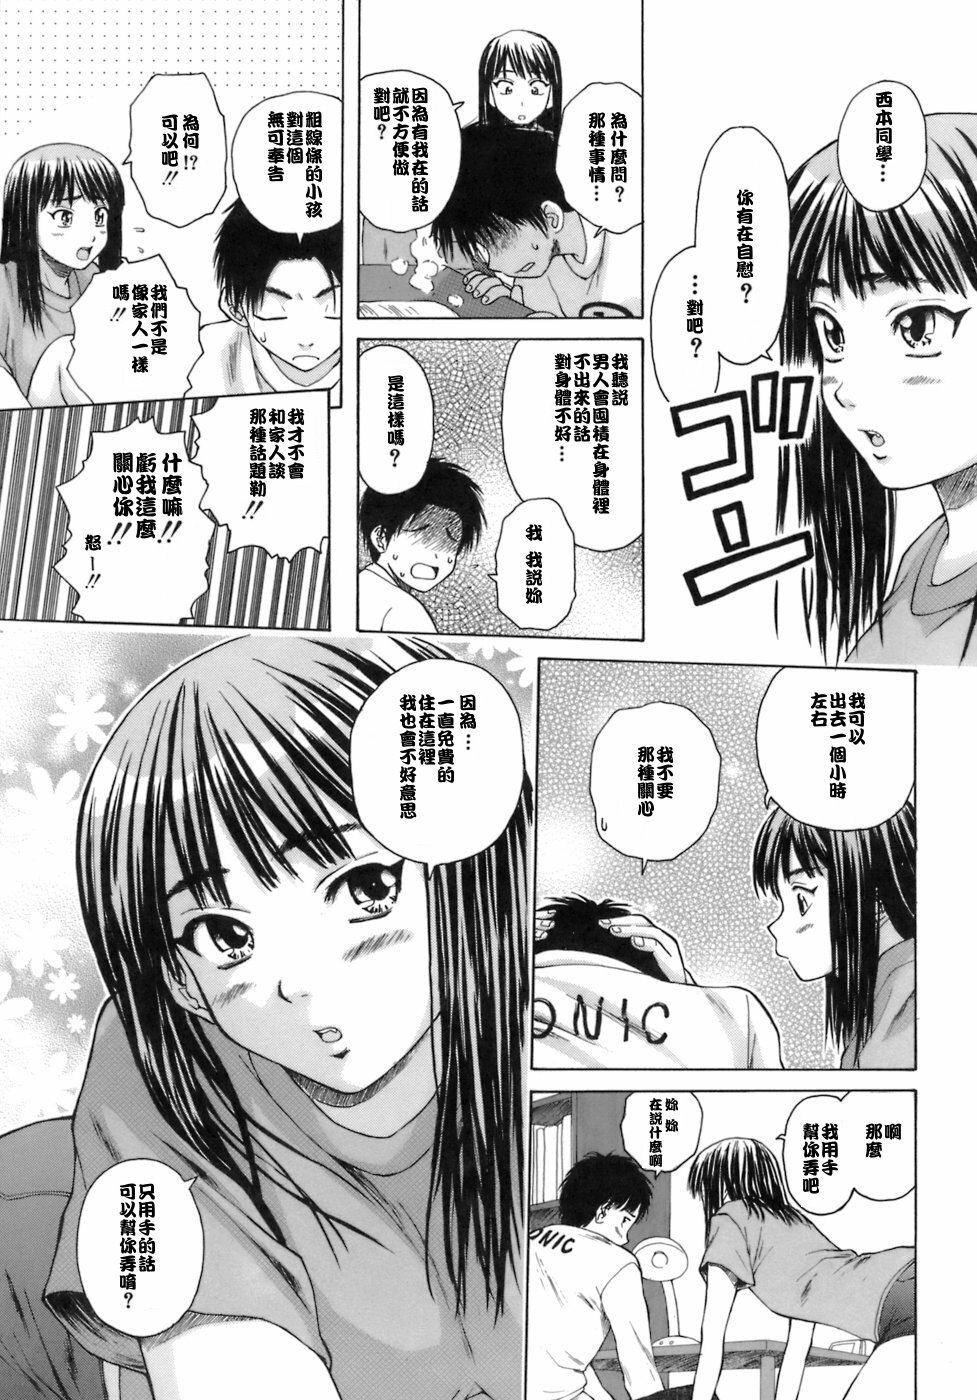 [Fuuga] Kyoushi to Seito to - Teacher and Student [Chinese] [悠月工房] page 22 full